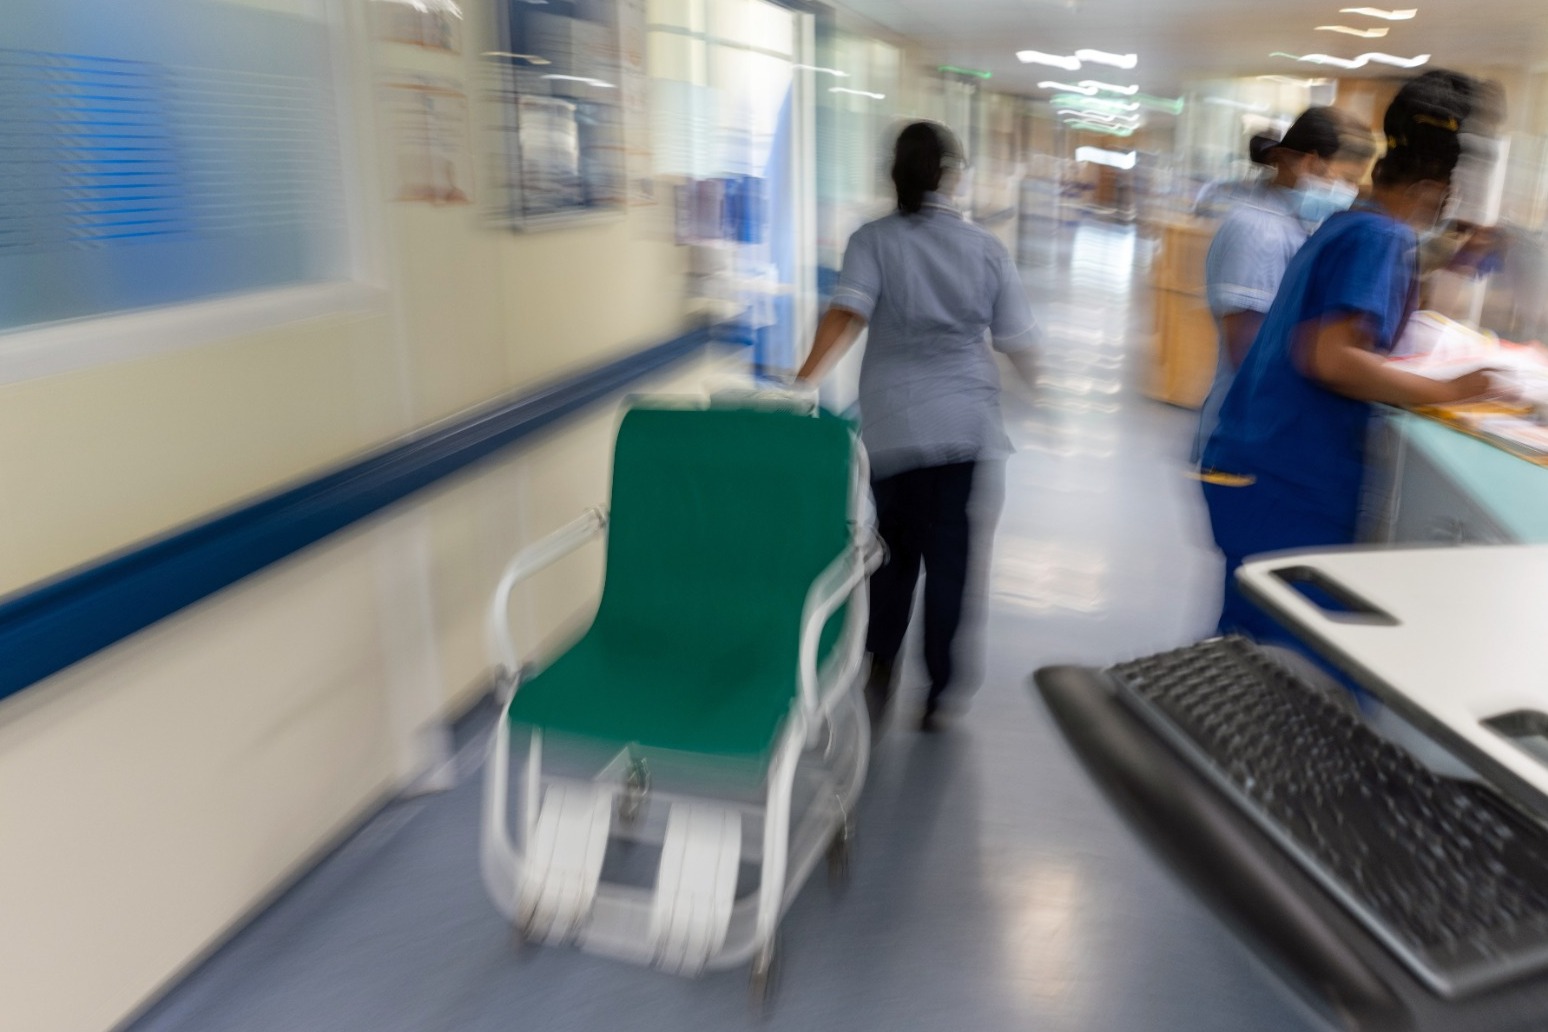 NHS substantially behind similar countries on life expectancy according to report 